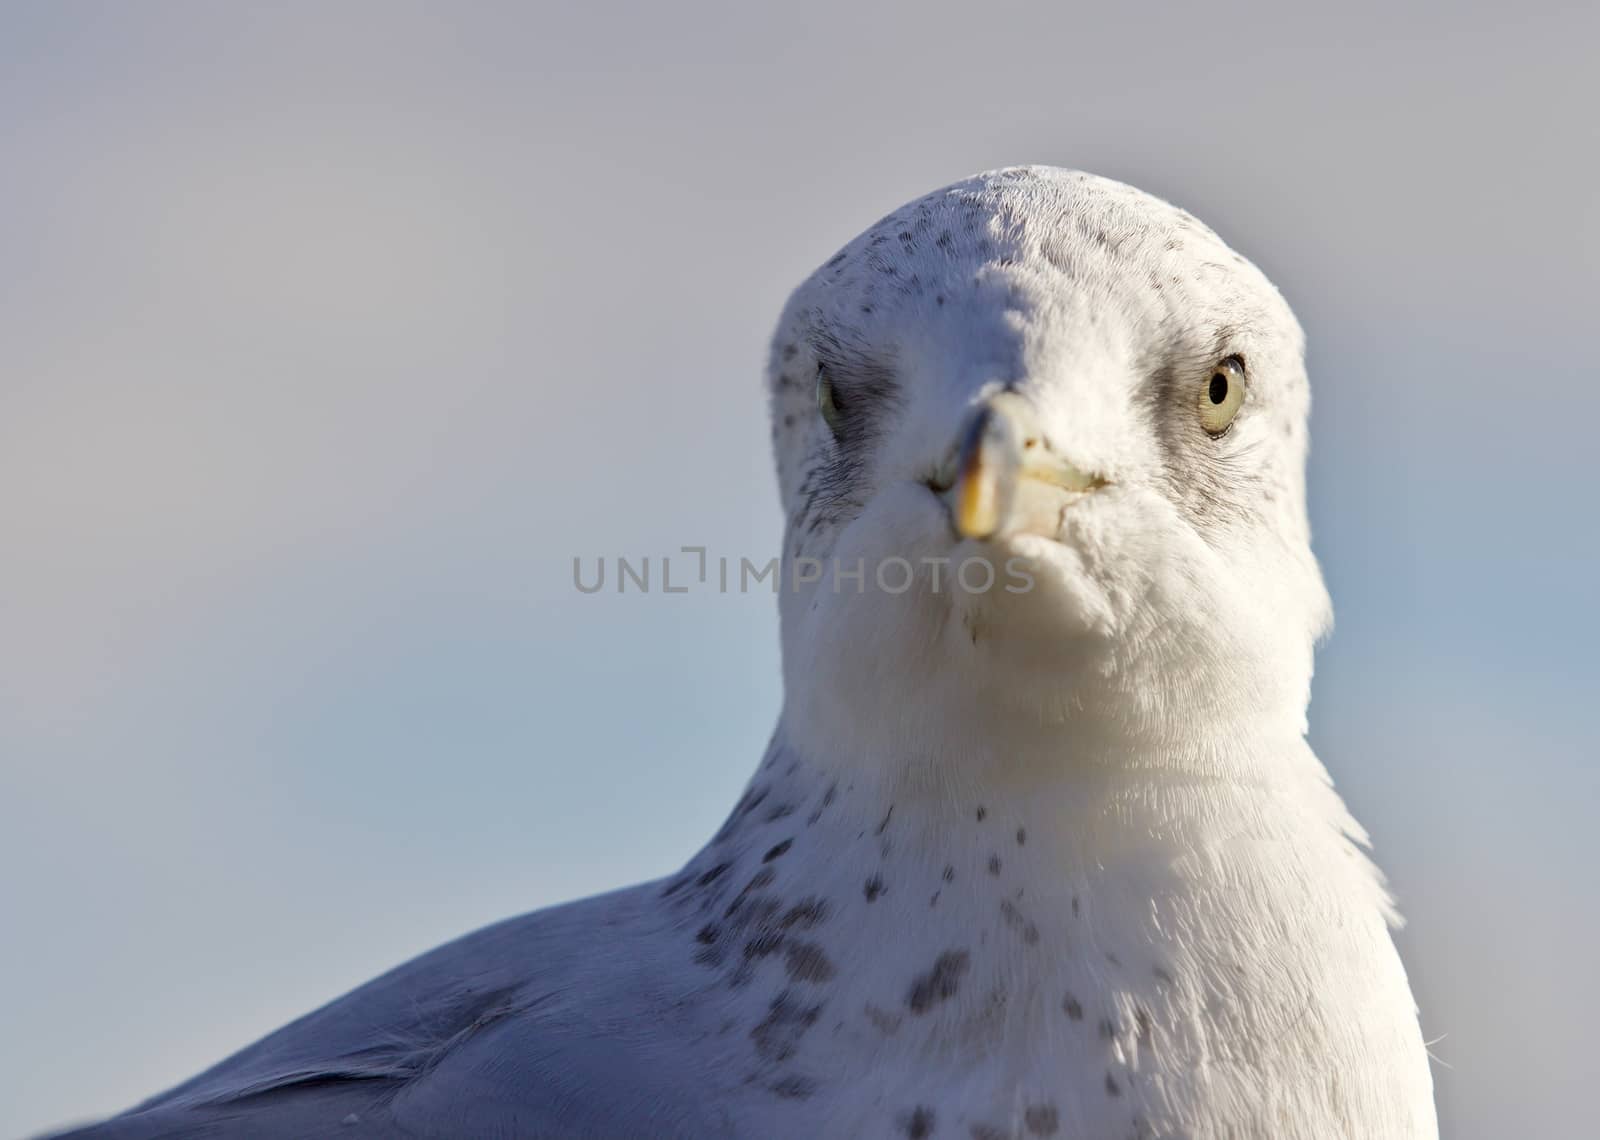 Beautiful portrait of a cute funny gull by teo